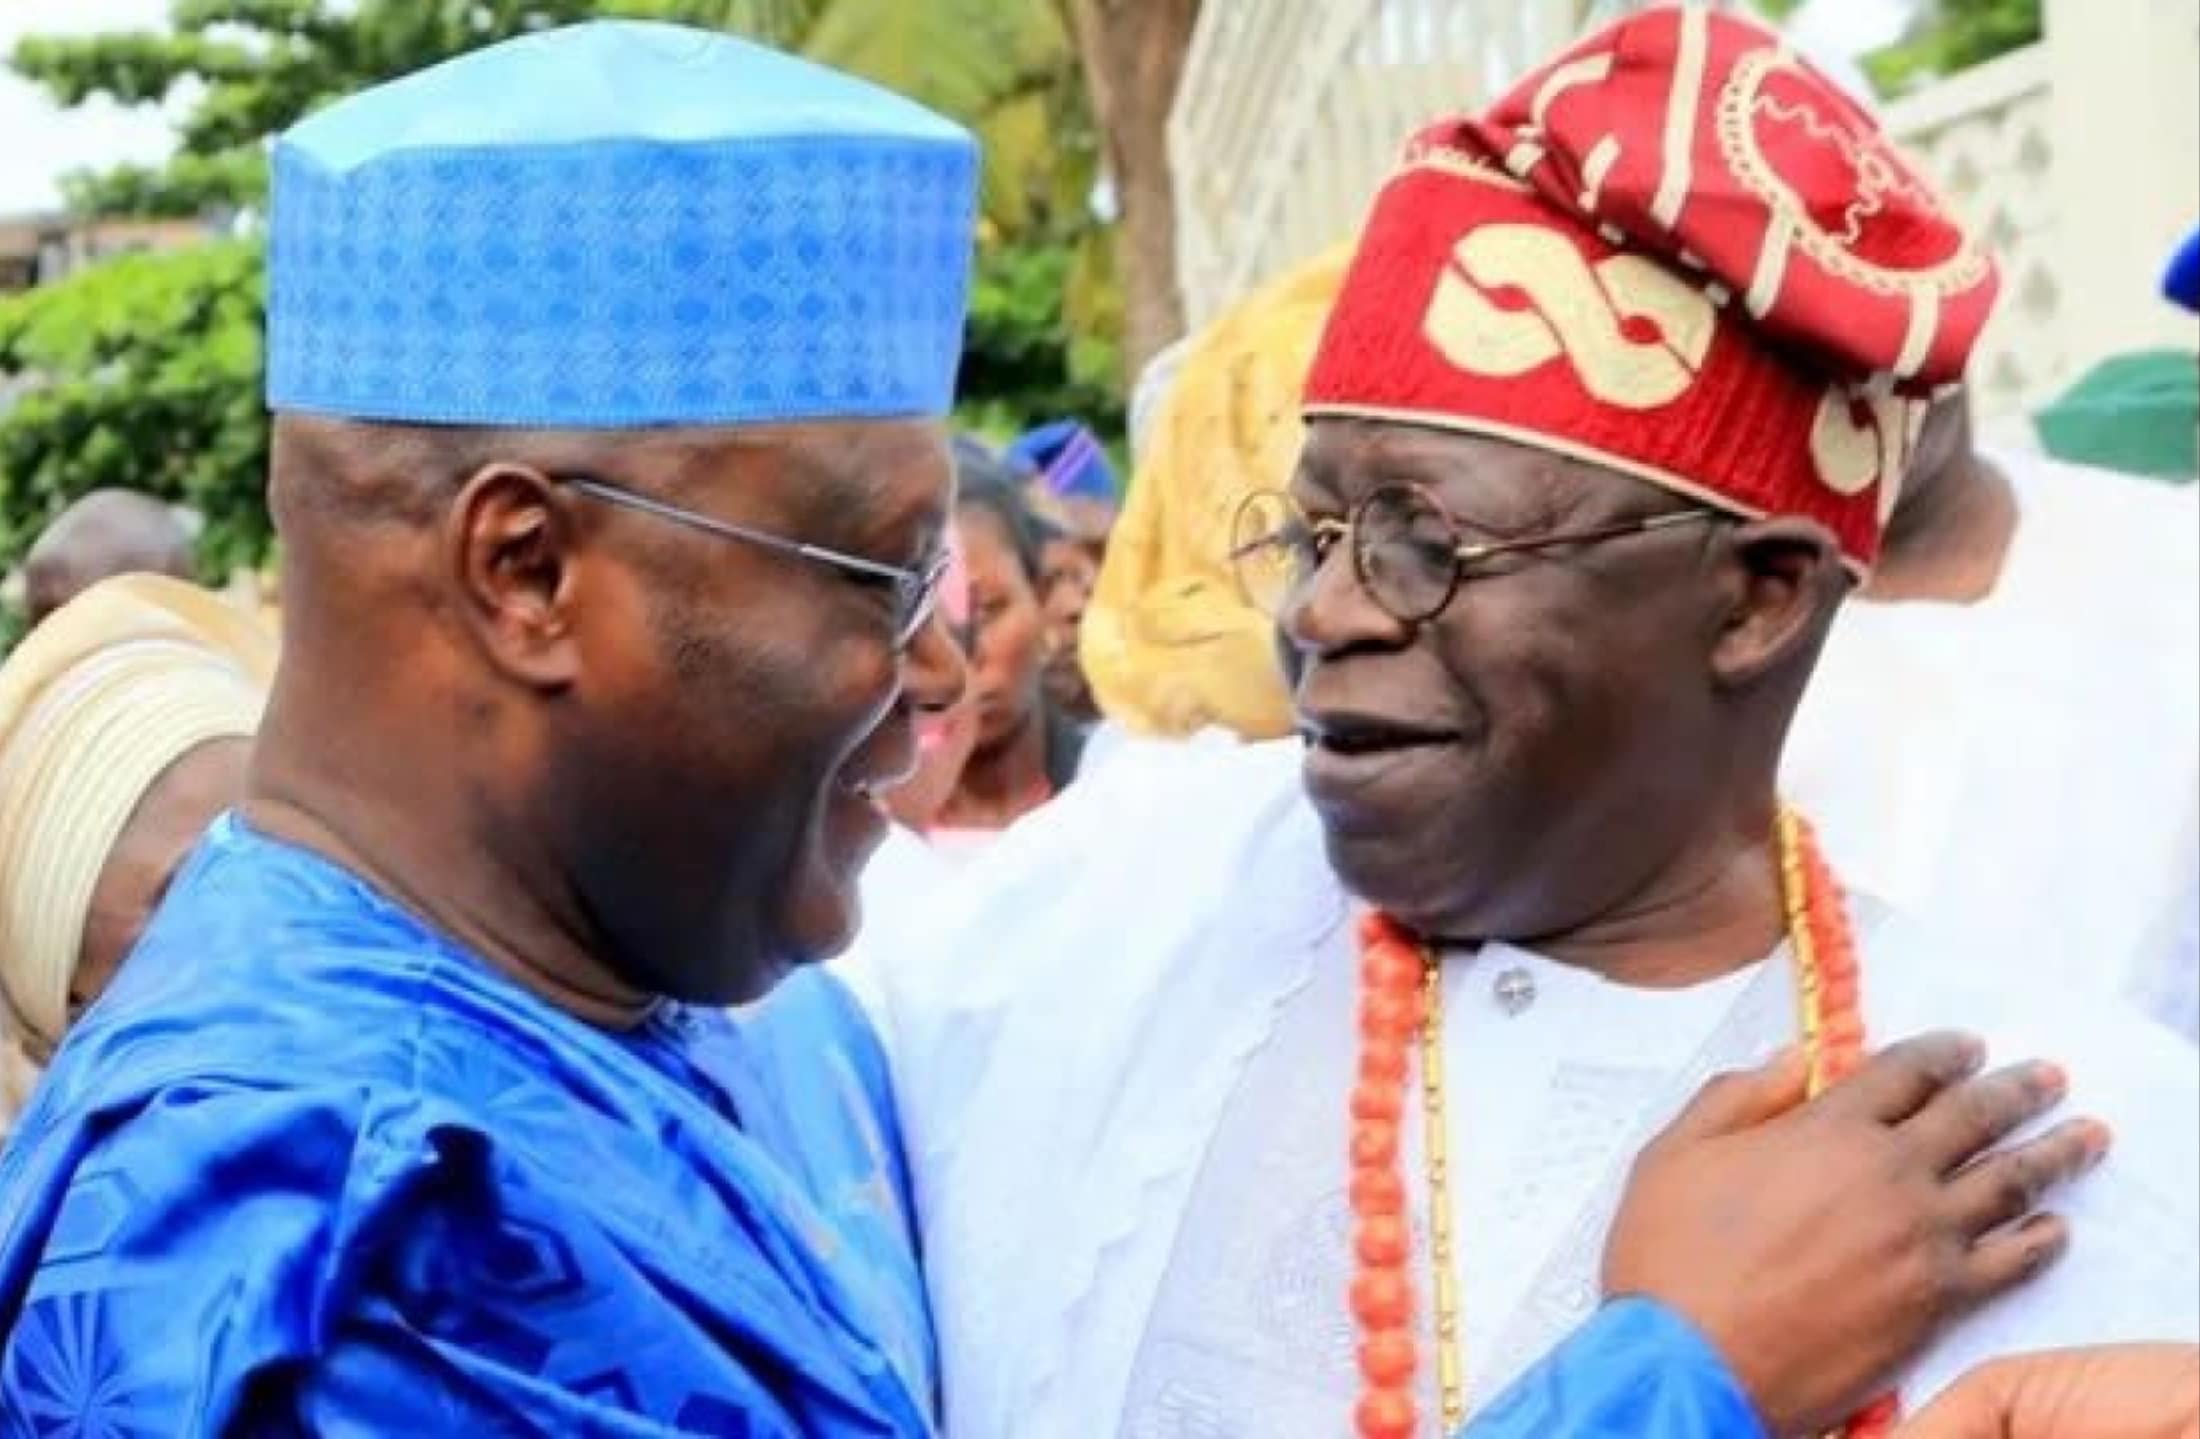 ell Nigerians how you obtained degree without primary, secondary education – Atiku urges Tinubu